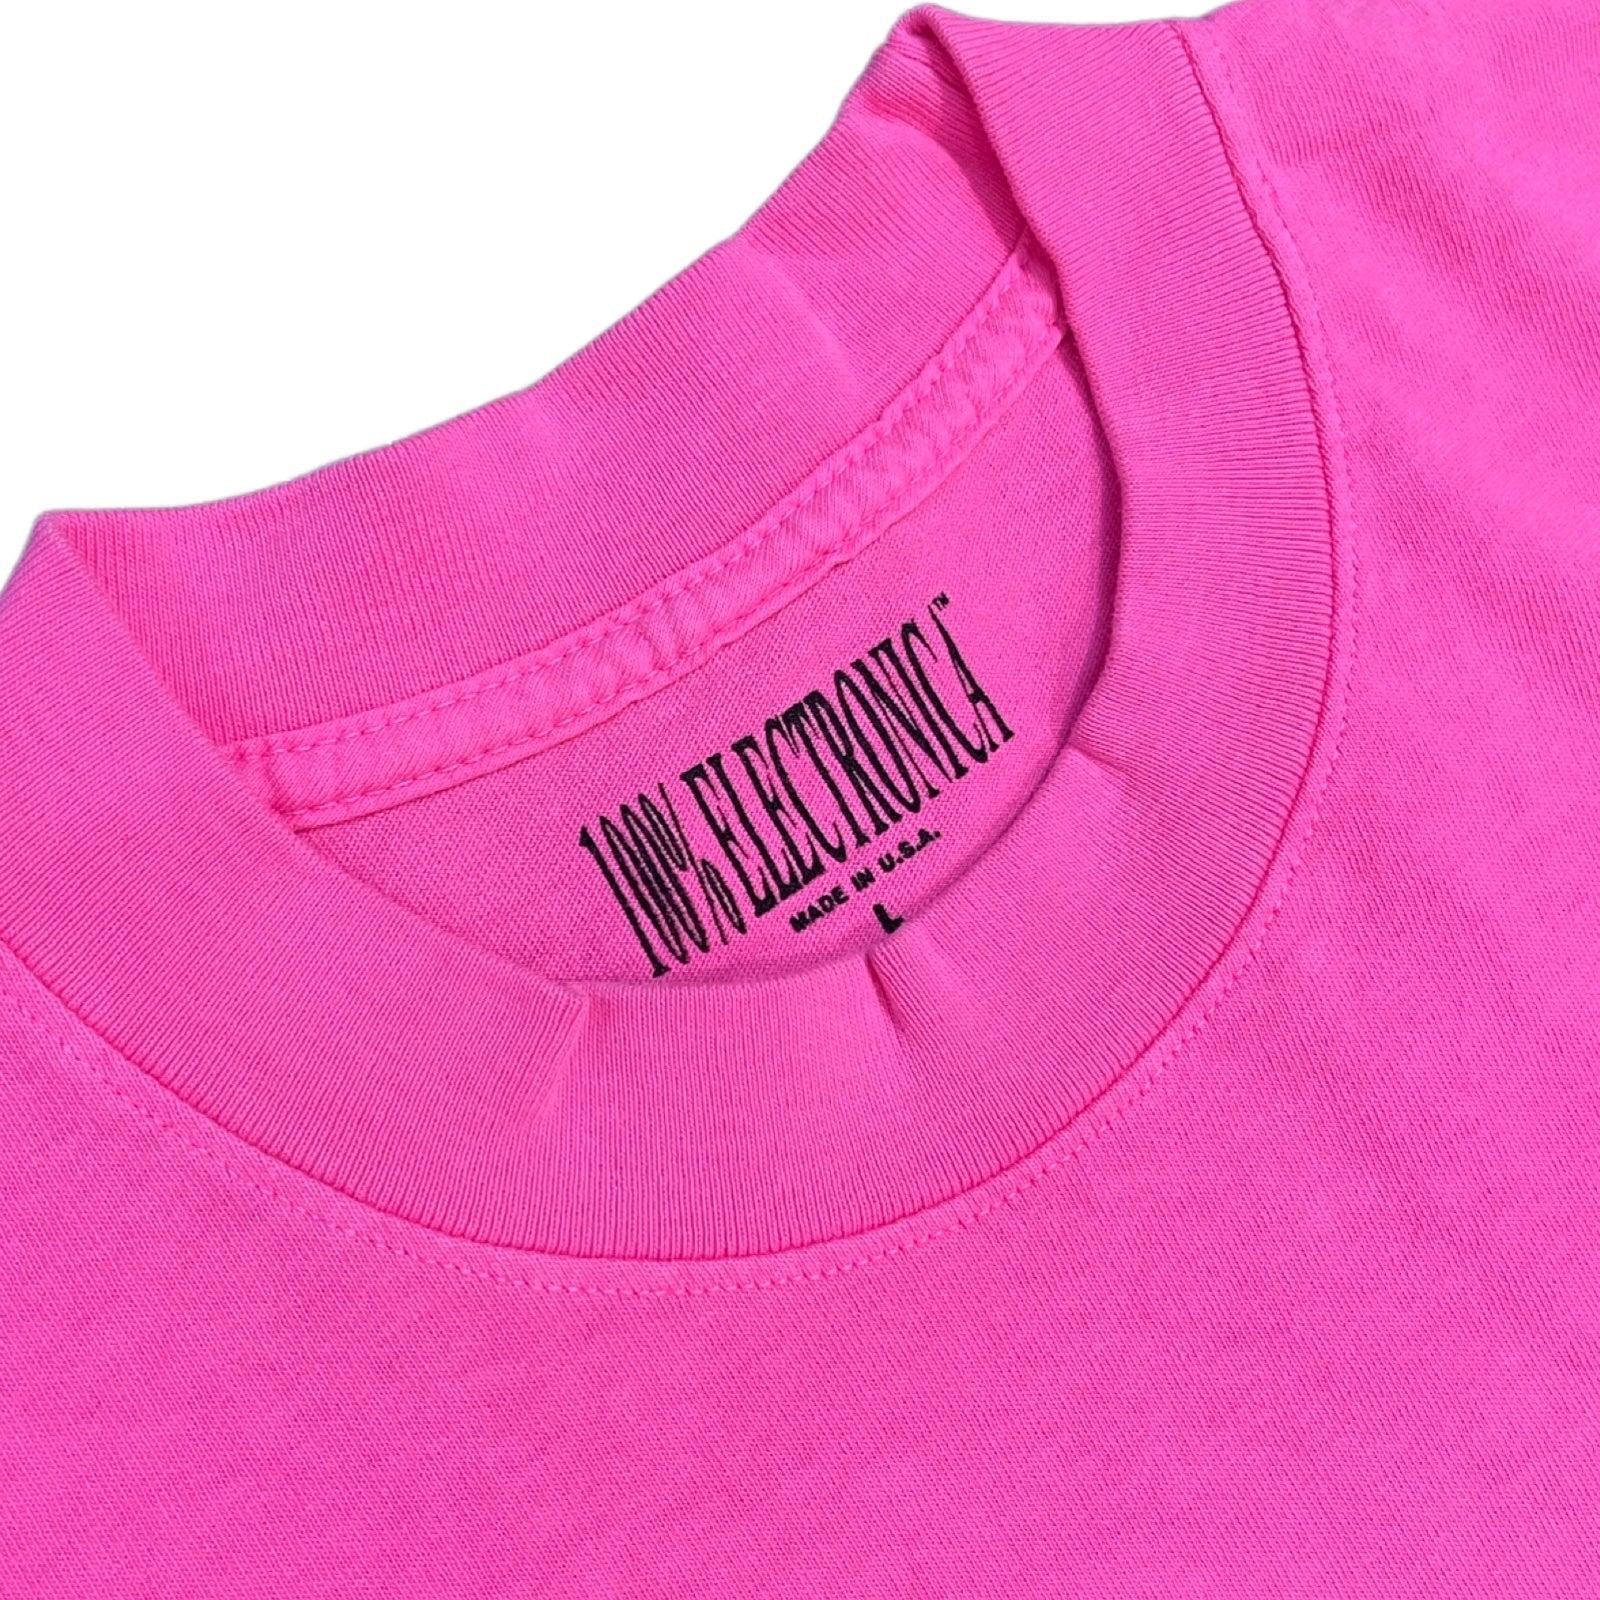 ESPRIT 空想 - Girls Only T-Shirt - Hot Pink - 100% Electronica Official Store (Photo 3)